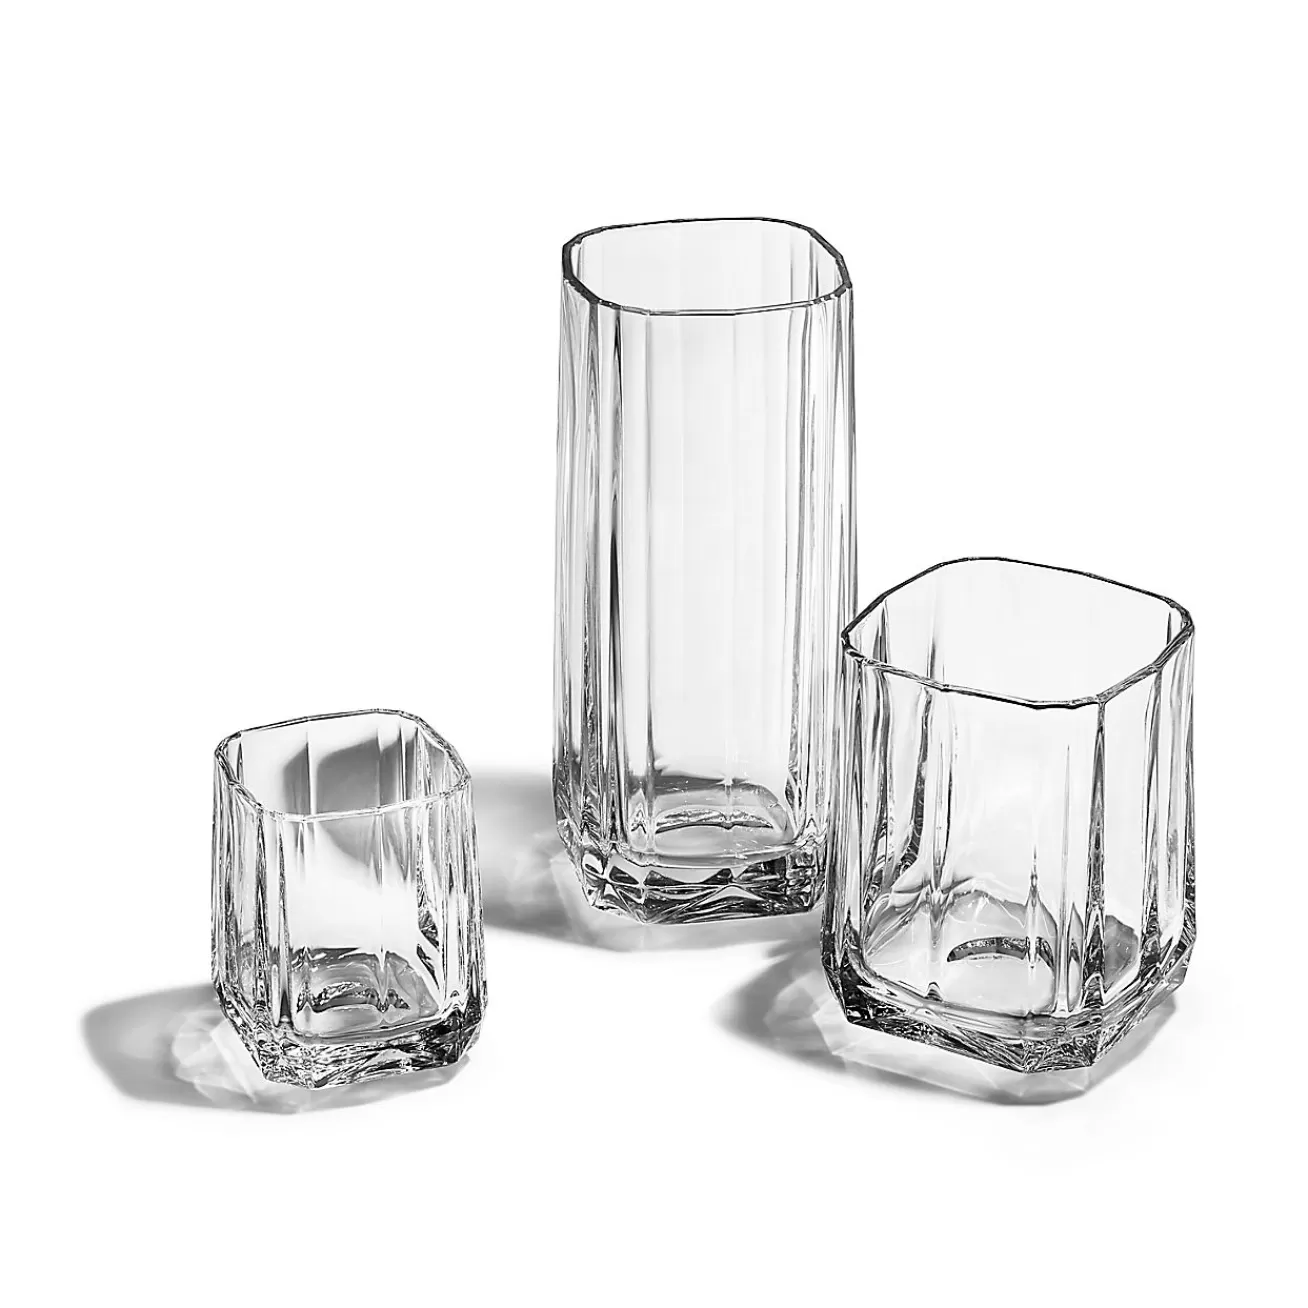 Tiffany & Co. Tiffany Facets Shot Glasses Set of Four, in Crystal Glass | ^ The Home | Housewarming Gifts